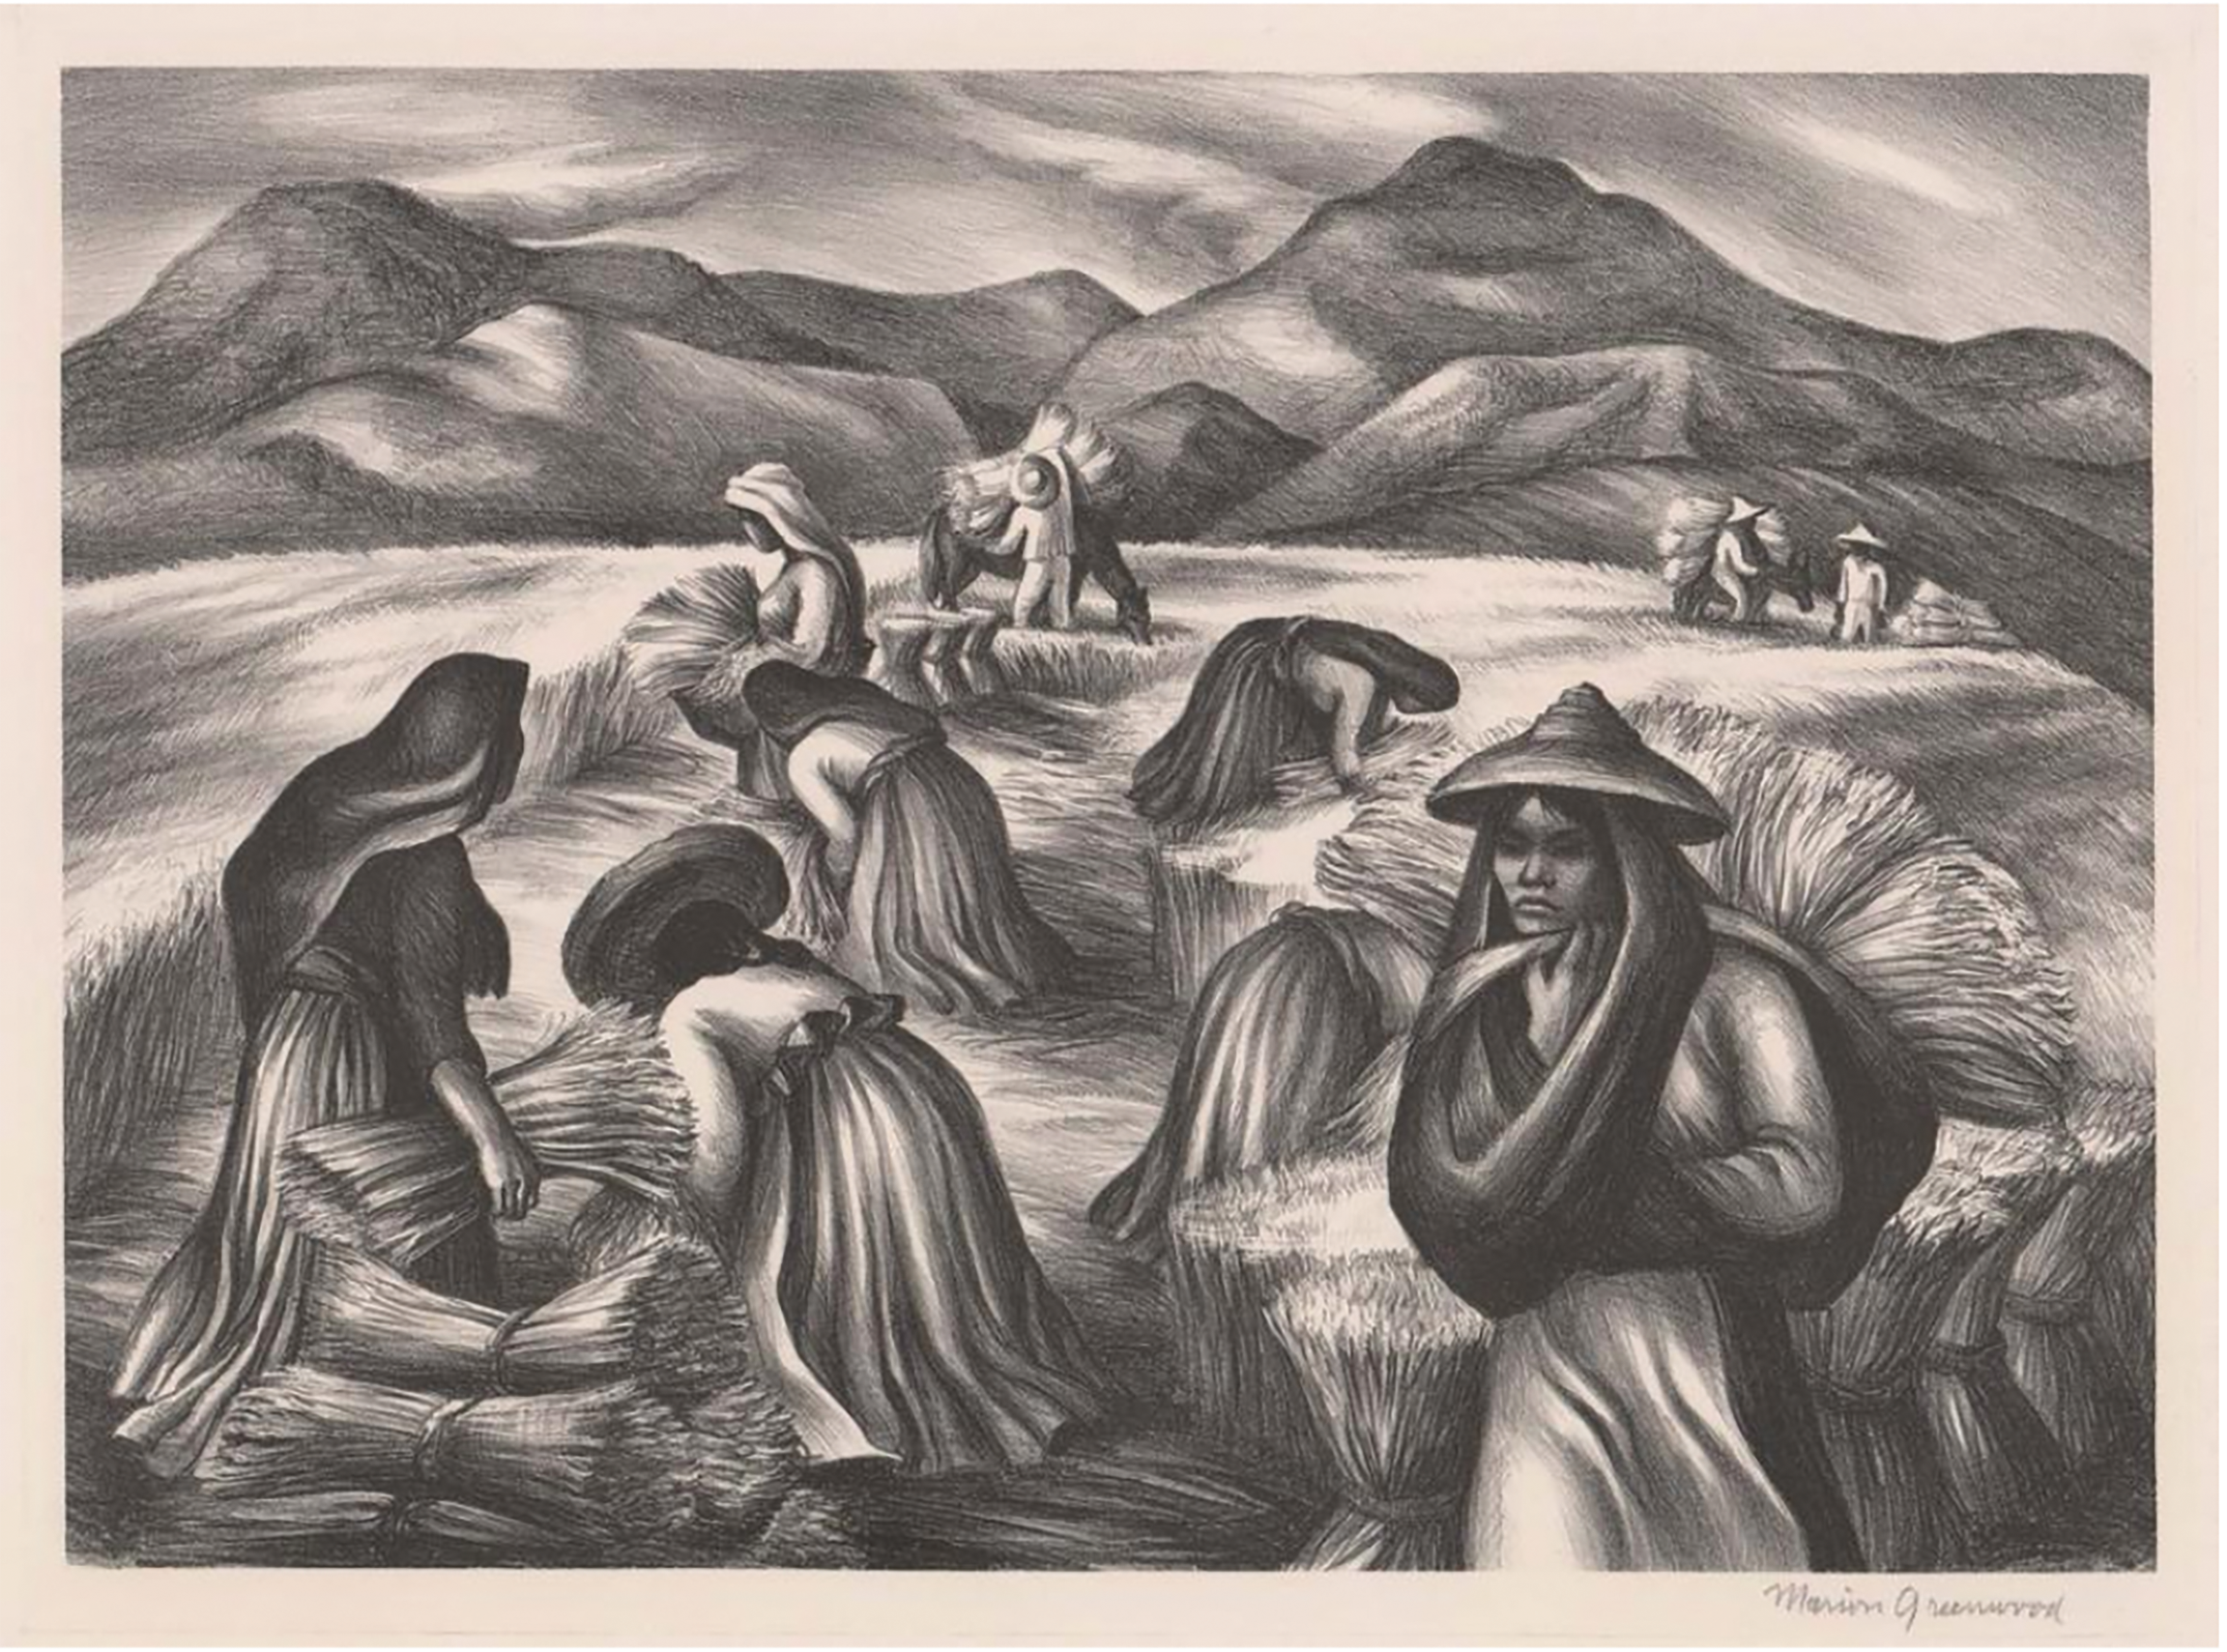 Lithograph of nine people harvesting wheat by hand throughout a large field.